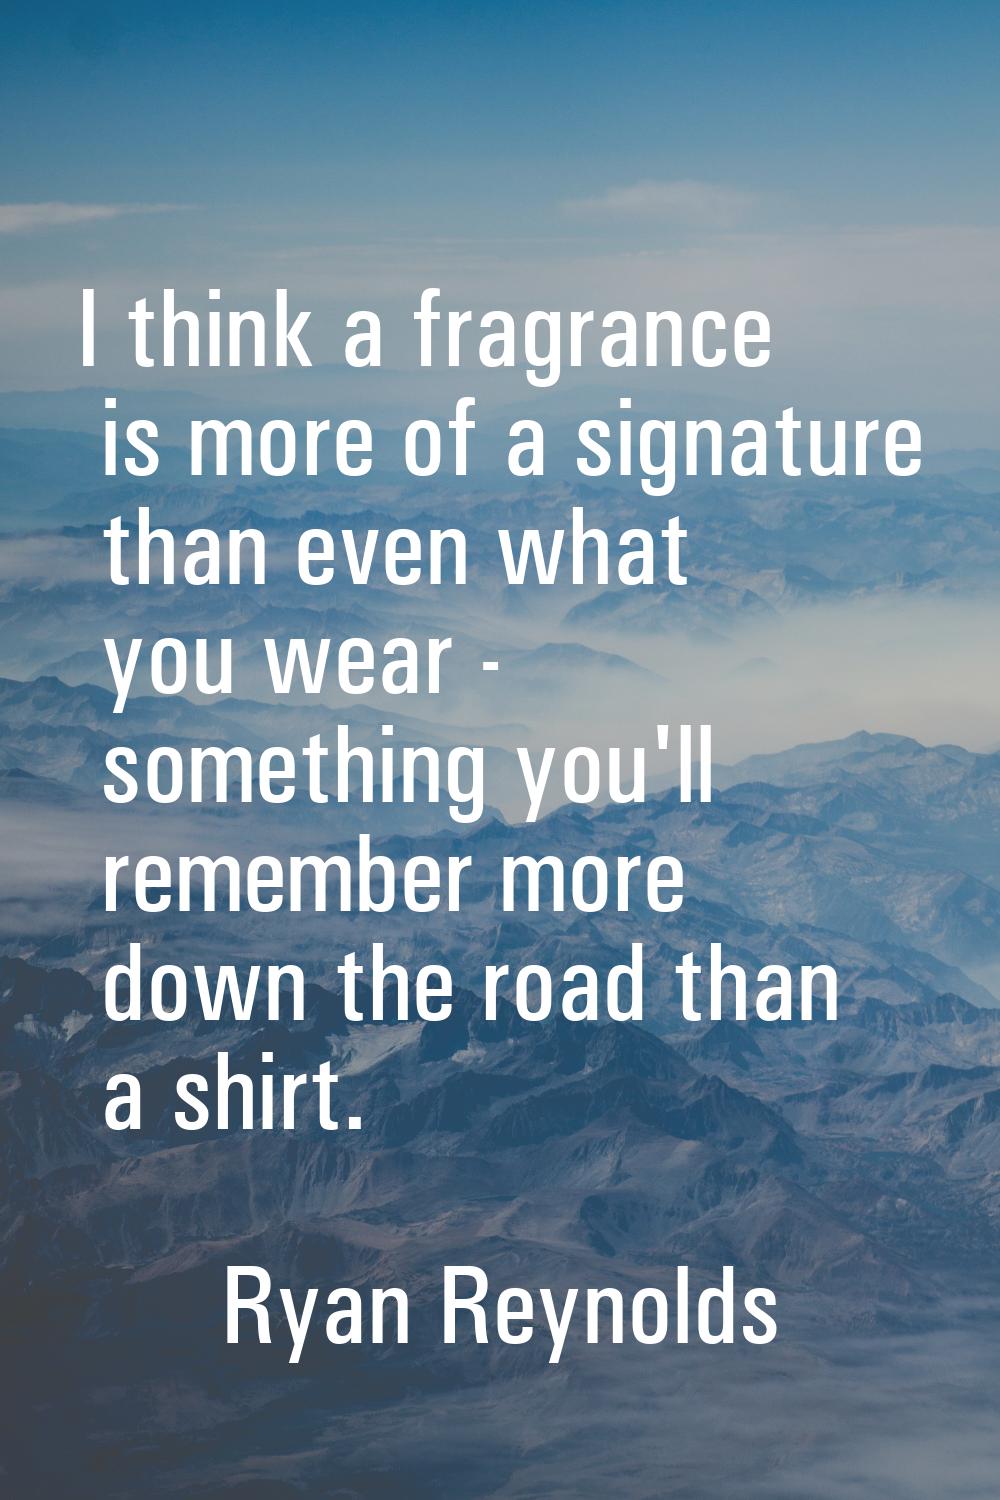 I think a fragrance is more of a signature than even what you wear - something you'll remember more